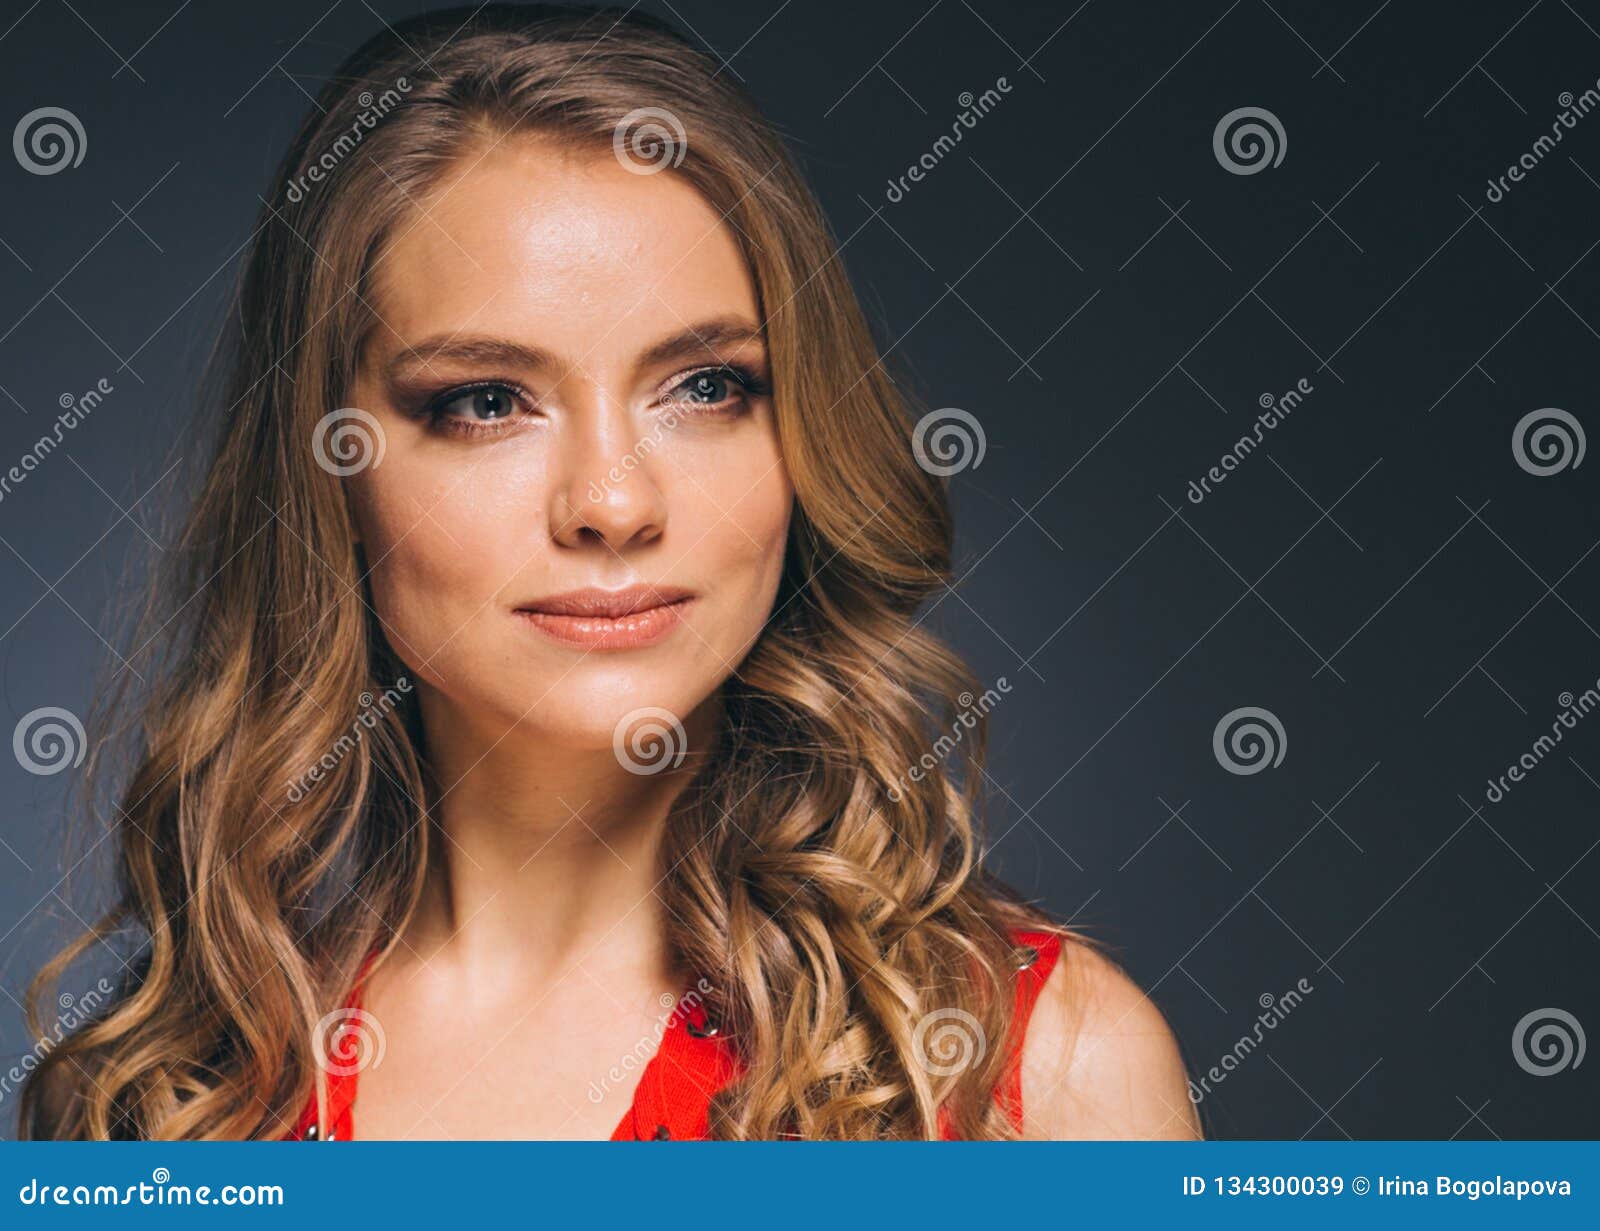 Woman in Red Dress with Long Blonde Hair Stock Image - Image of hair ...